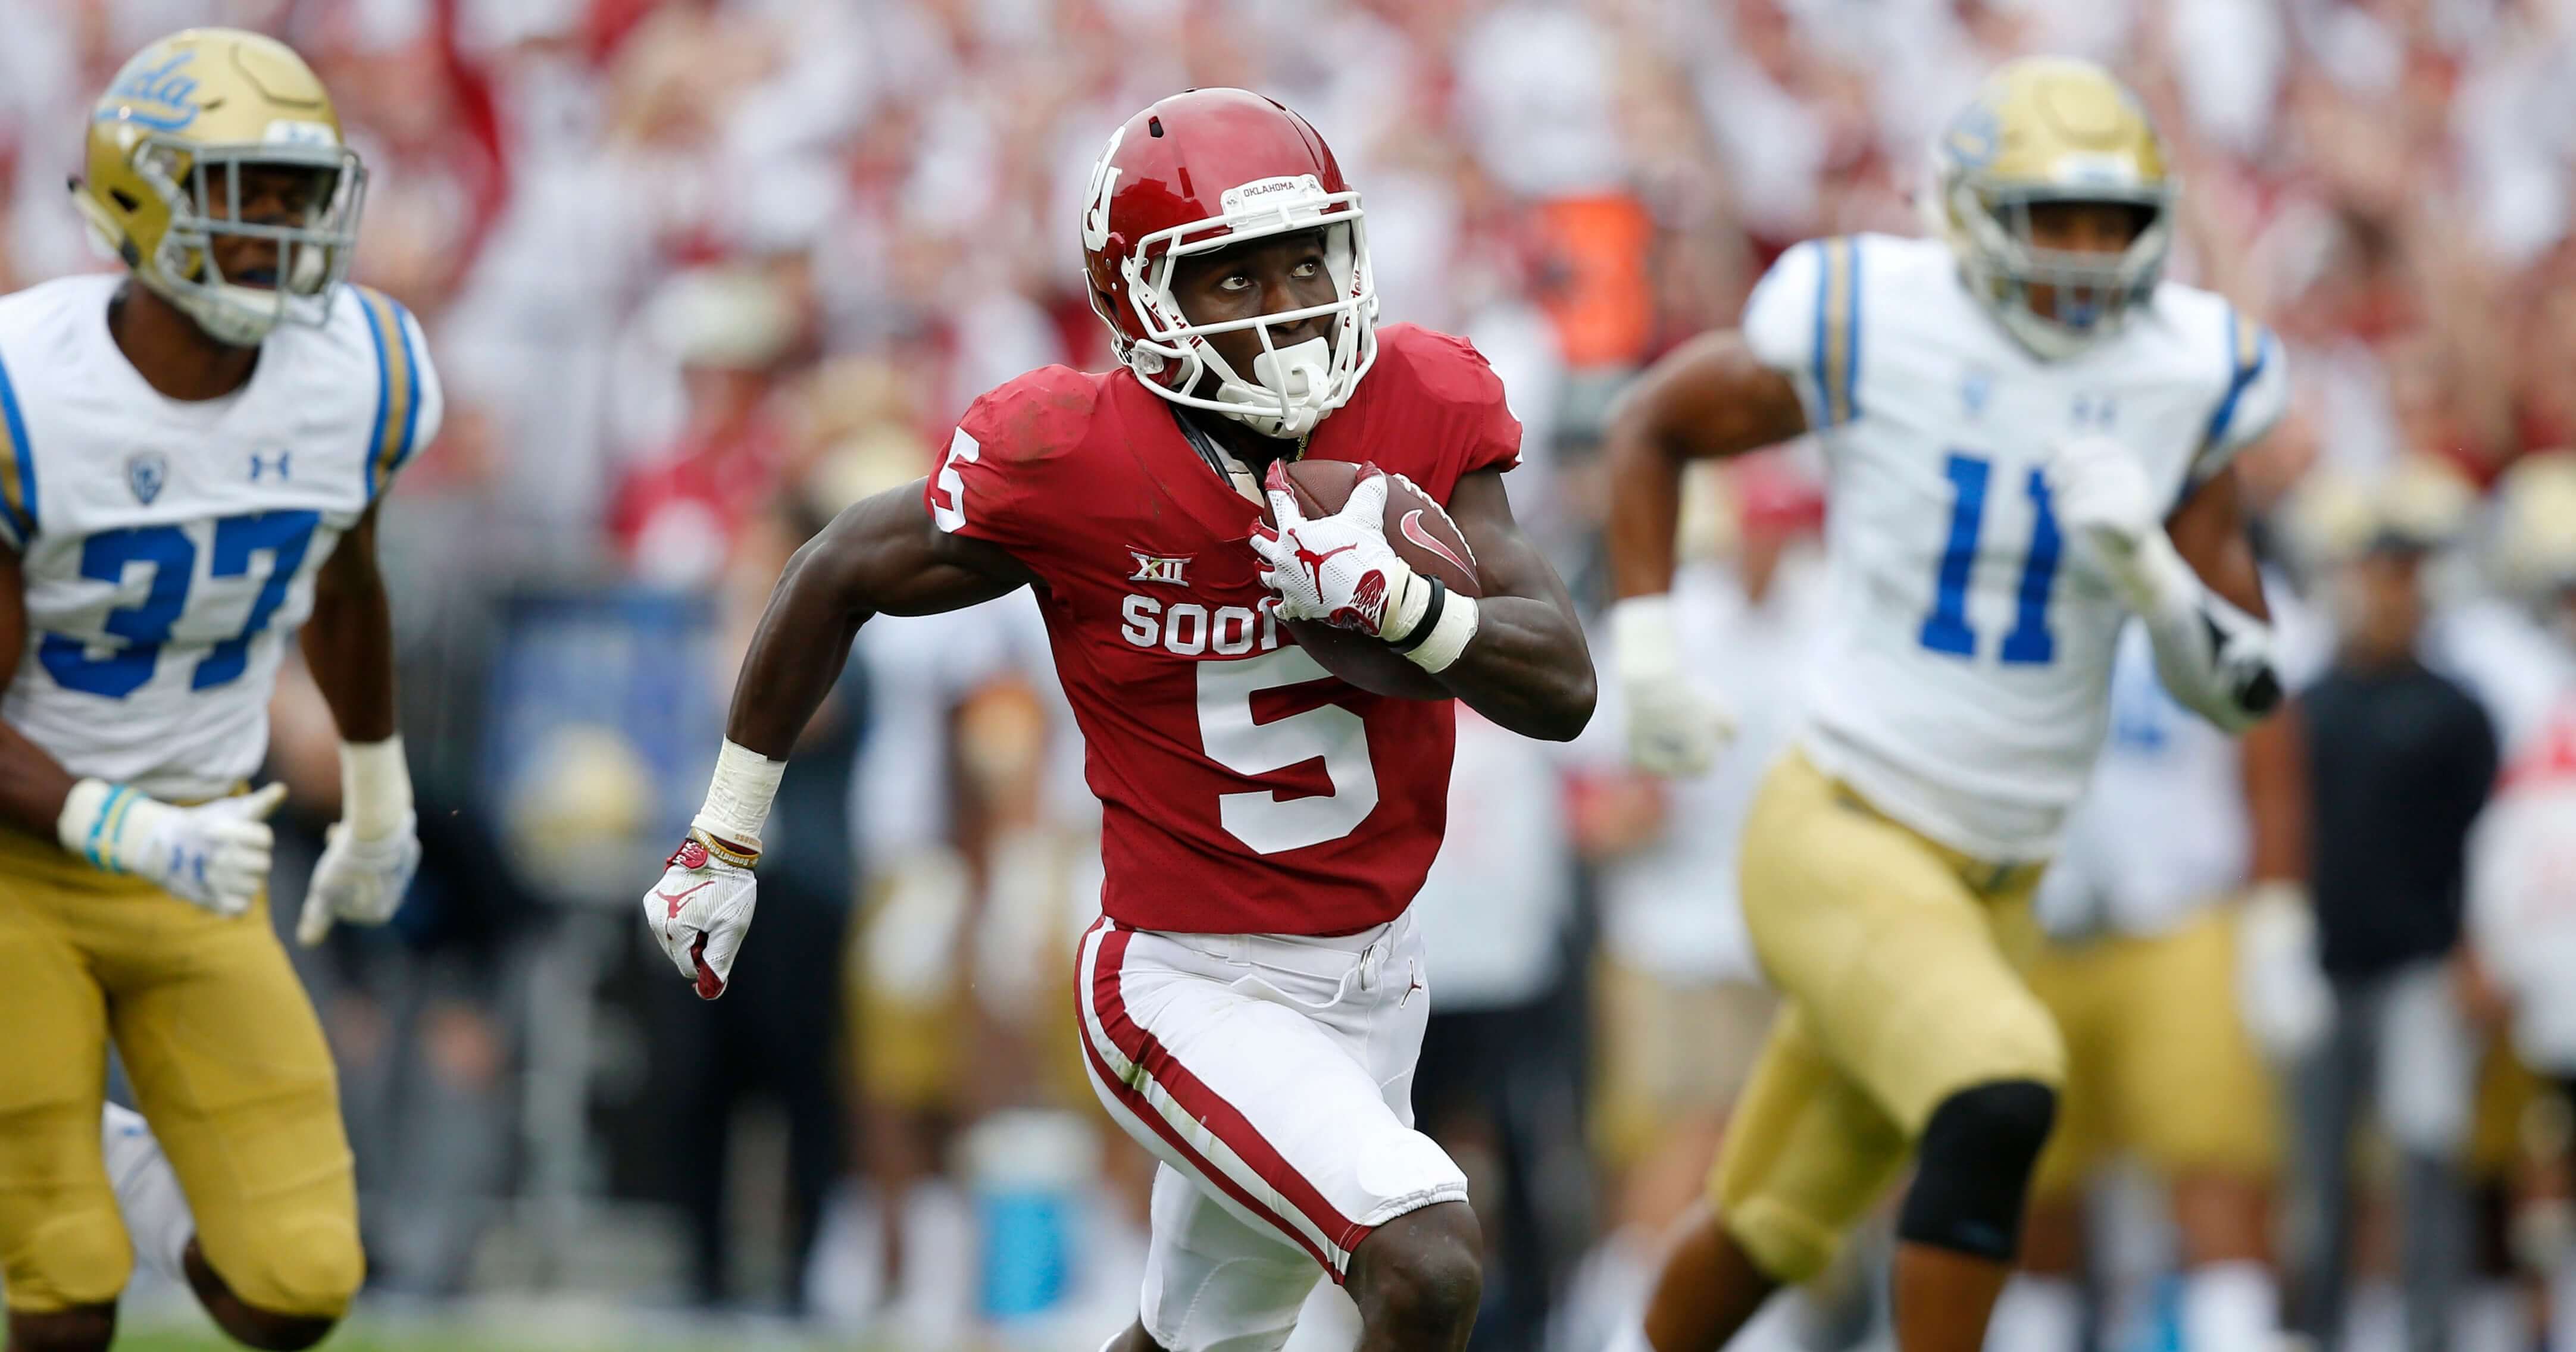 Oklahoma wide receiver Marquise Brown runs away from UCLA defensive back Quentin Lake (37) and linebacker Keisean Lucier-South (11) for a touchdown in the first quarter of their Sept. 8 game in Norman.